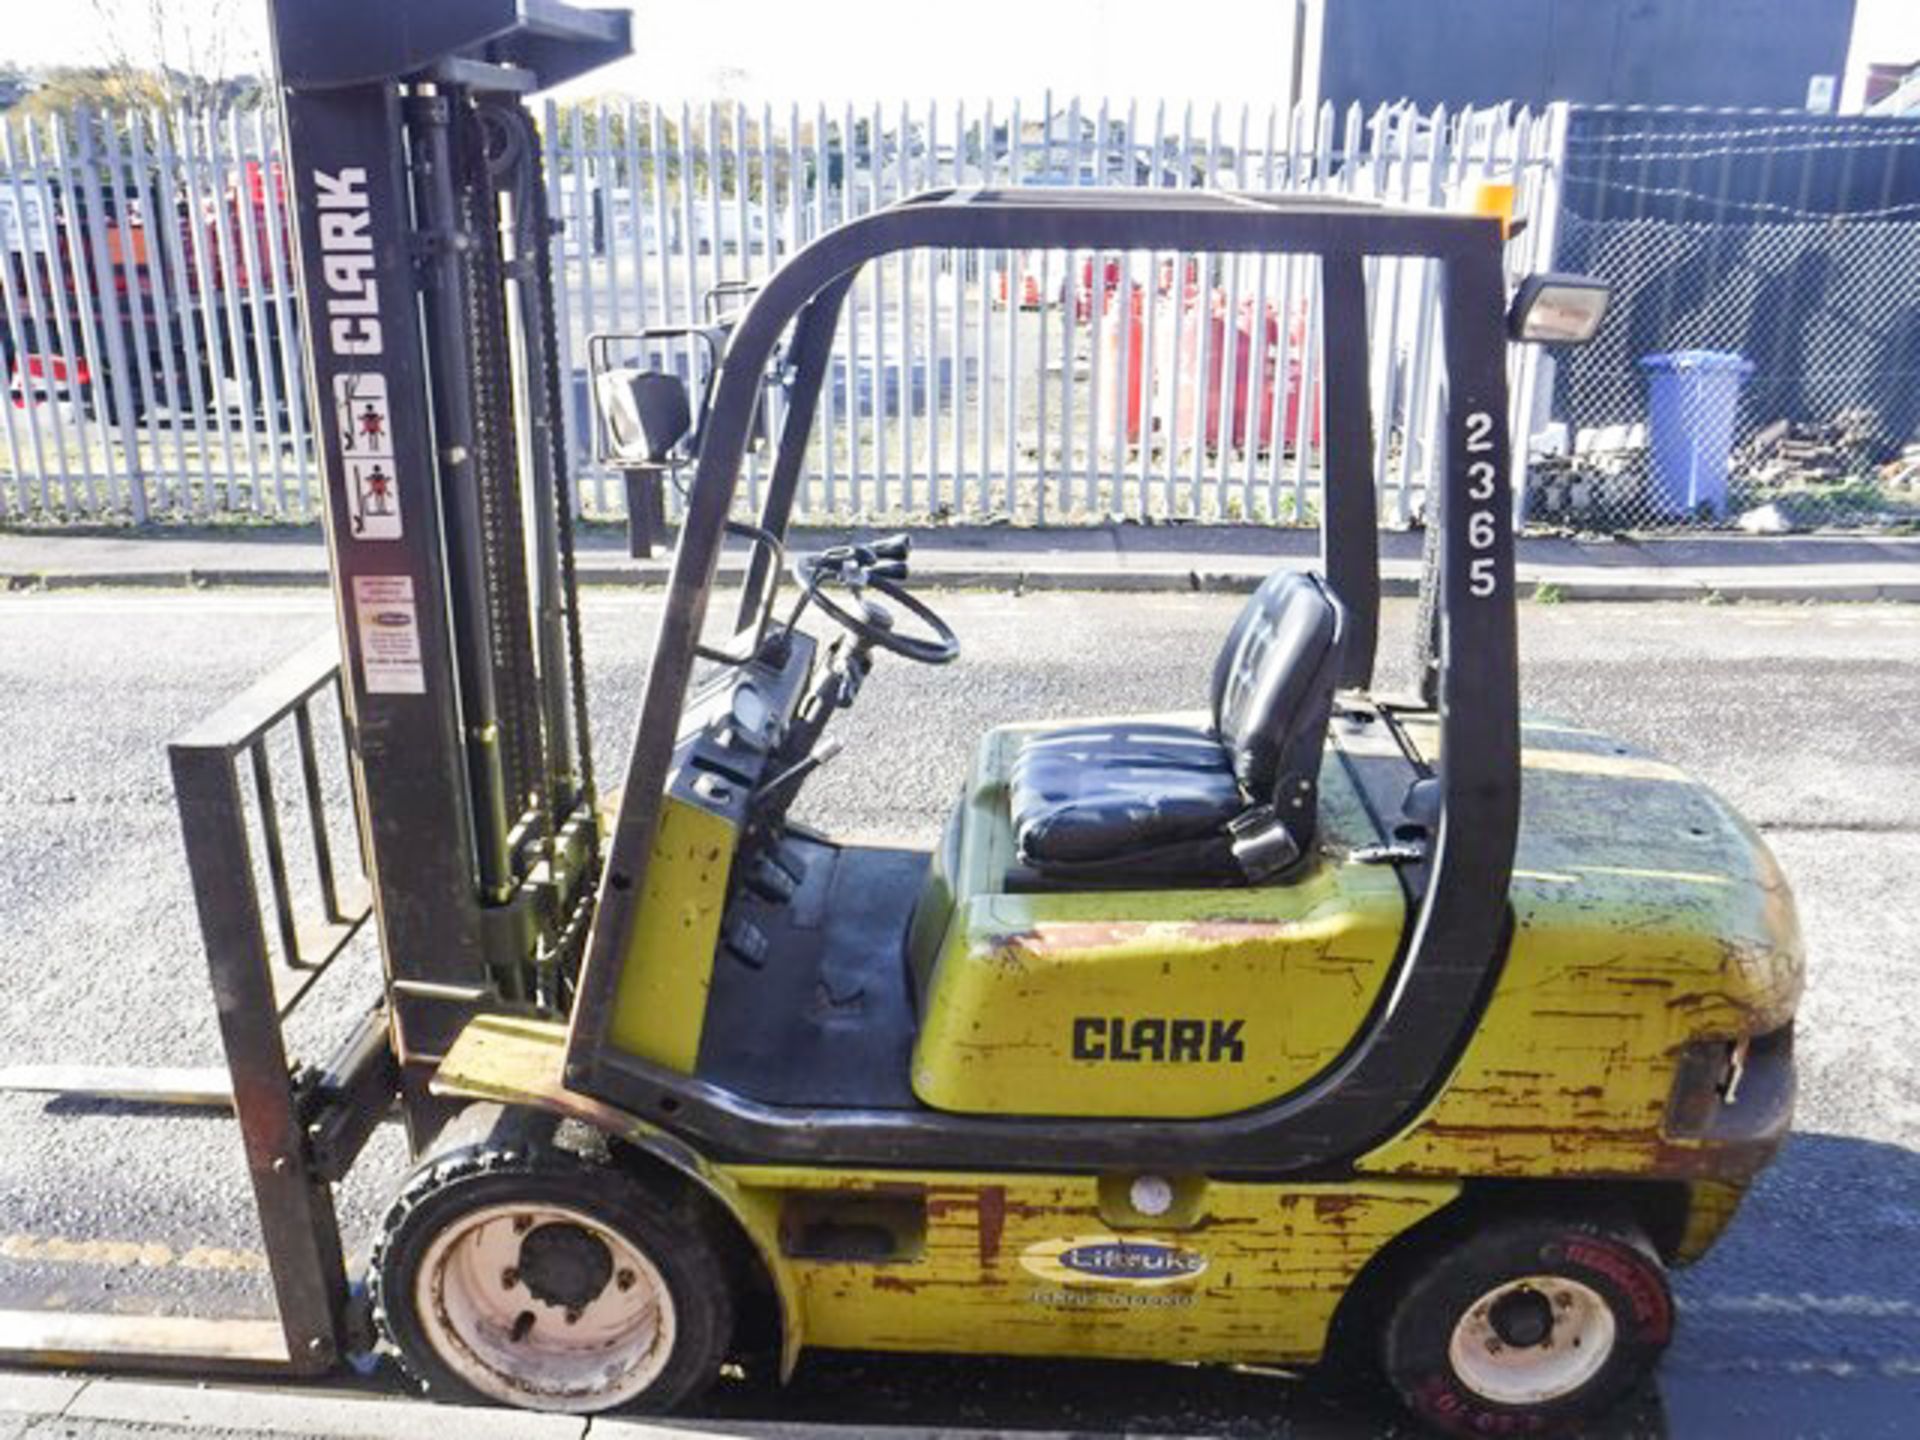 CLARKE 3 TON DIESEL FORKLIFT WITH SIDE SHIFT 7832HRS (NOT VERIFIED) - Image 13 of 16